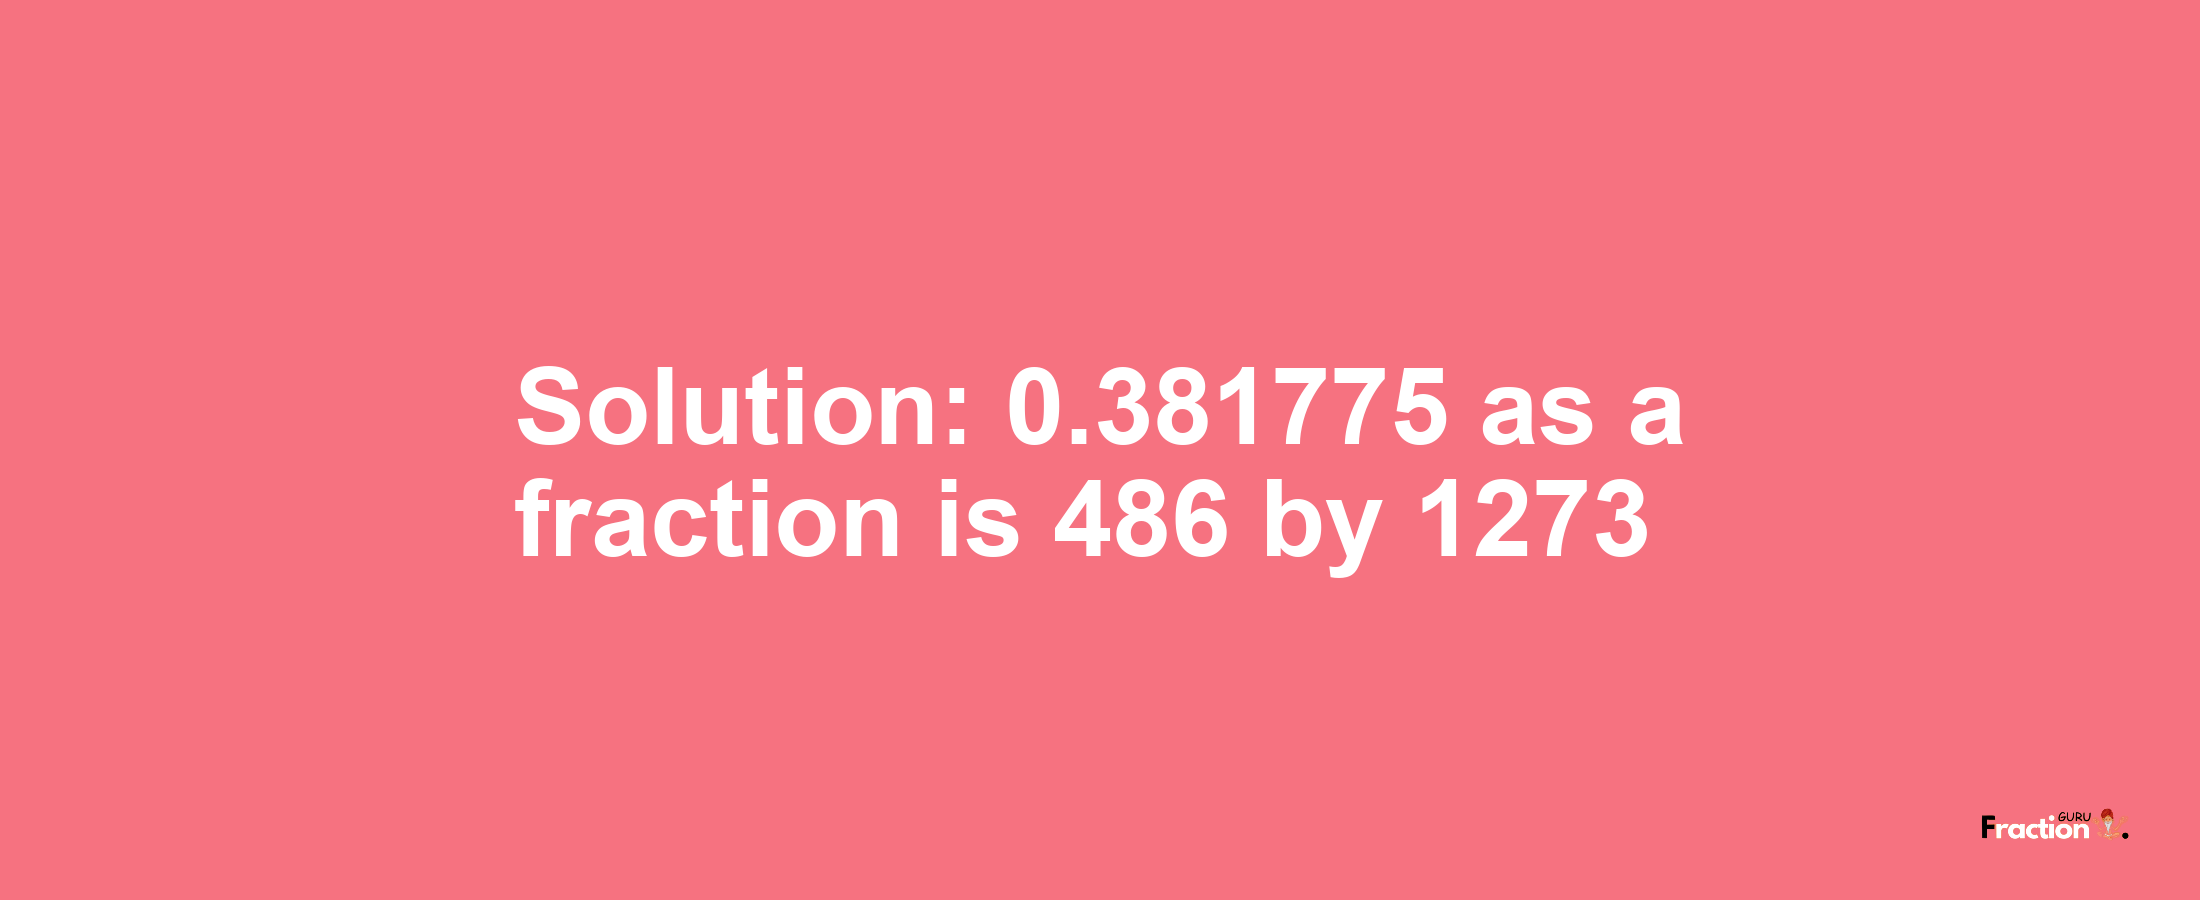 Solution:0.381775 as a fraction is 486/1273